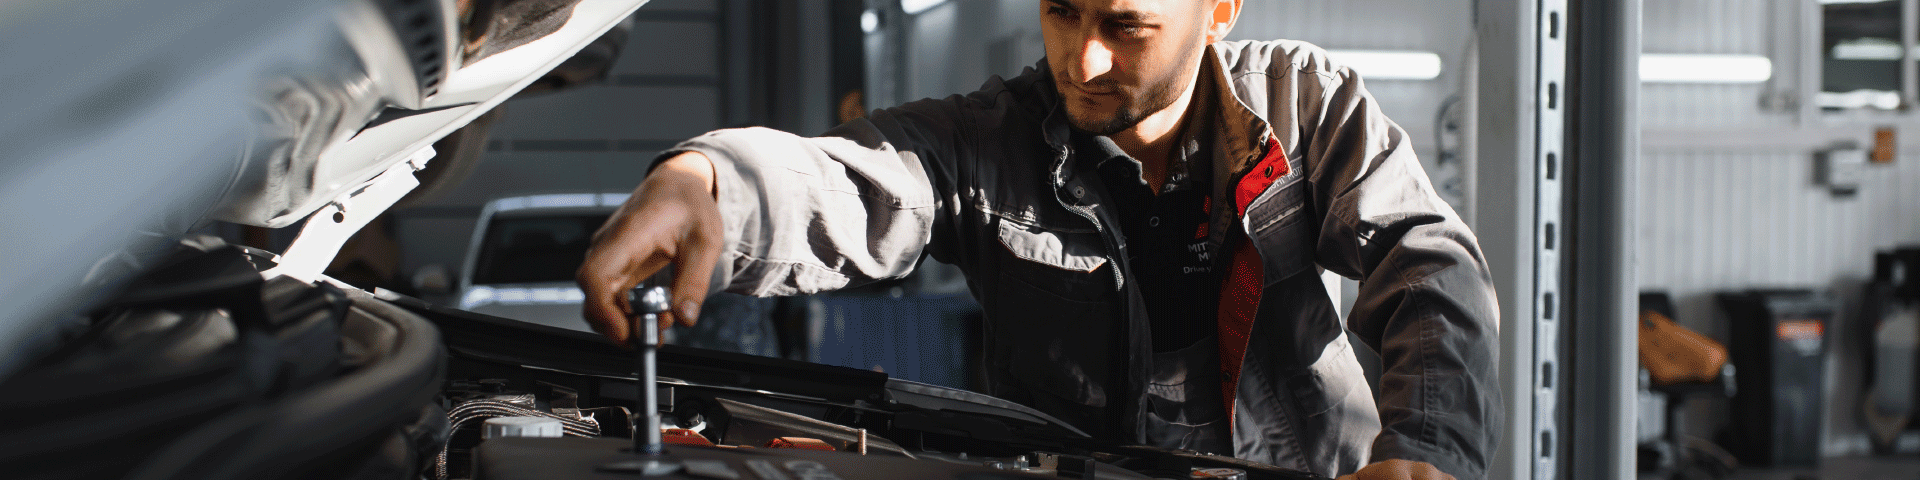 Image of a mechanic holding a wrench, working on a car’s engine.